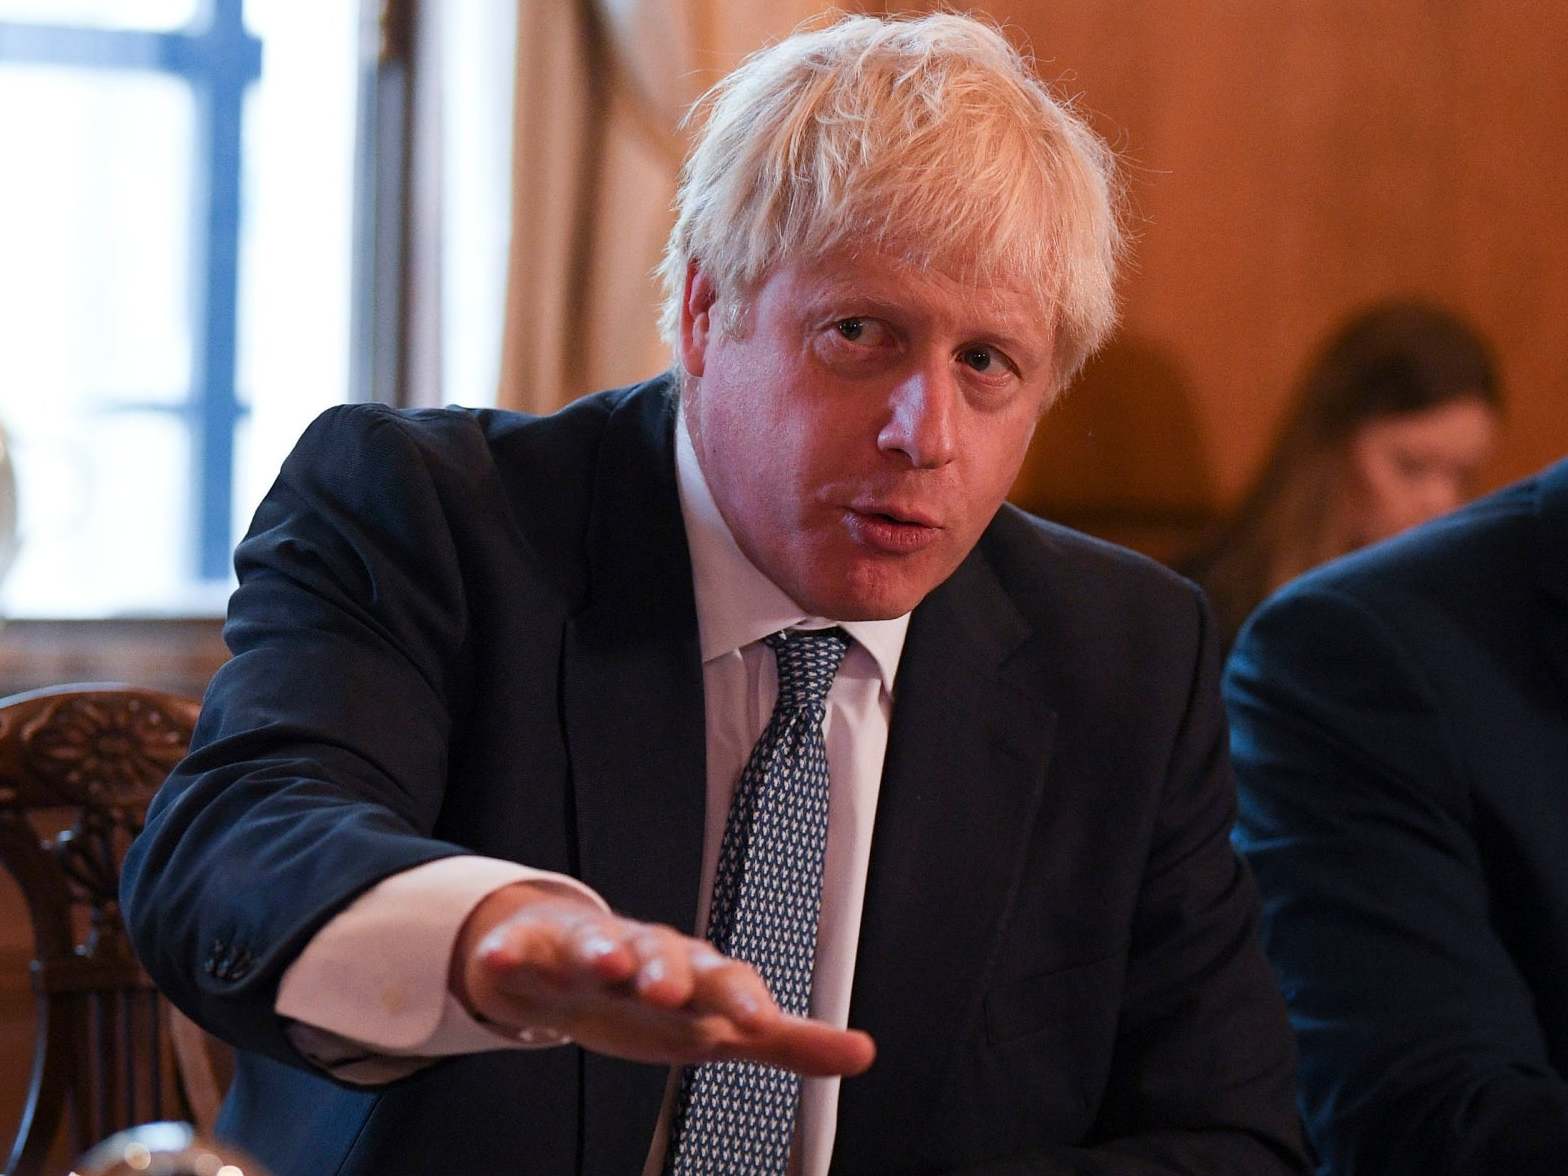 Johnson has vowed to pull Britain out of the EU by 31 October ‘do or die’